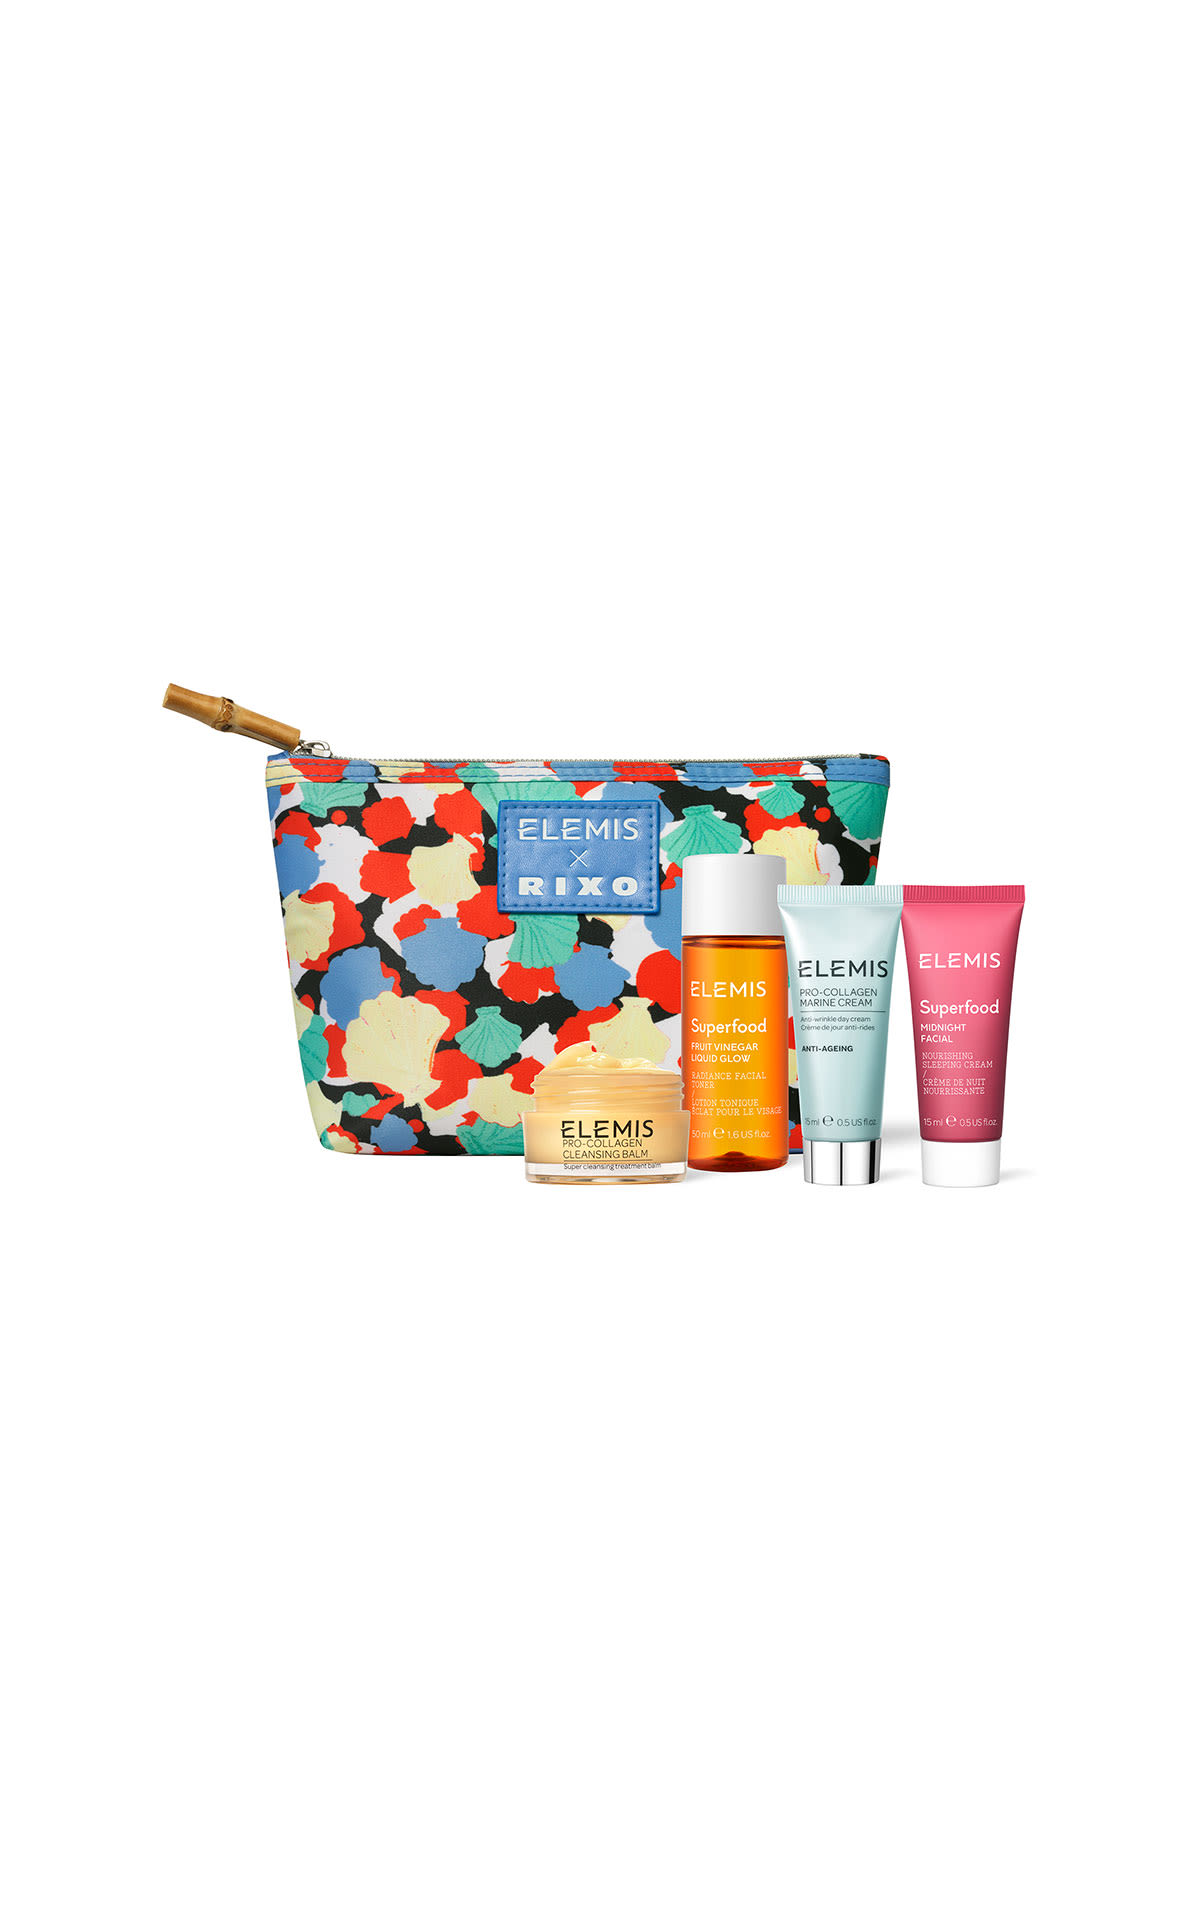 Elemis Elemis x rixo gift with purchase from Bicester Village